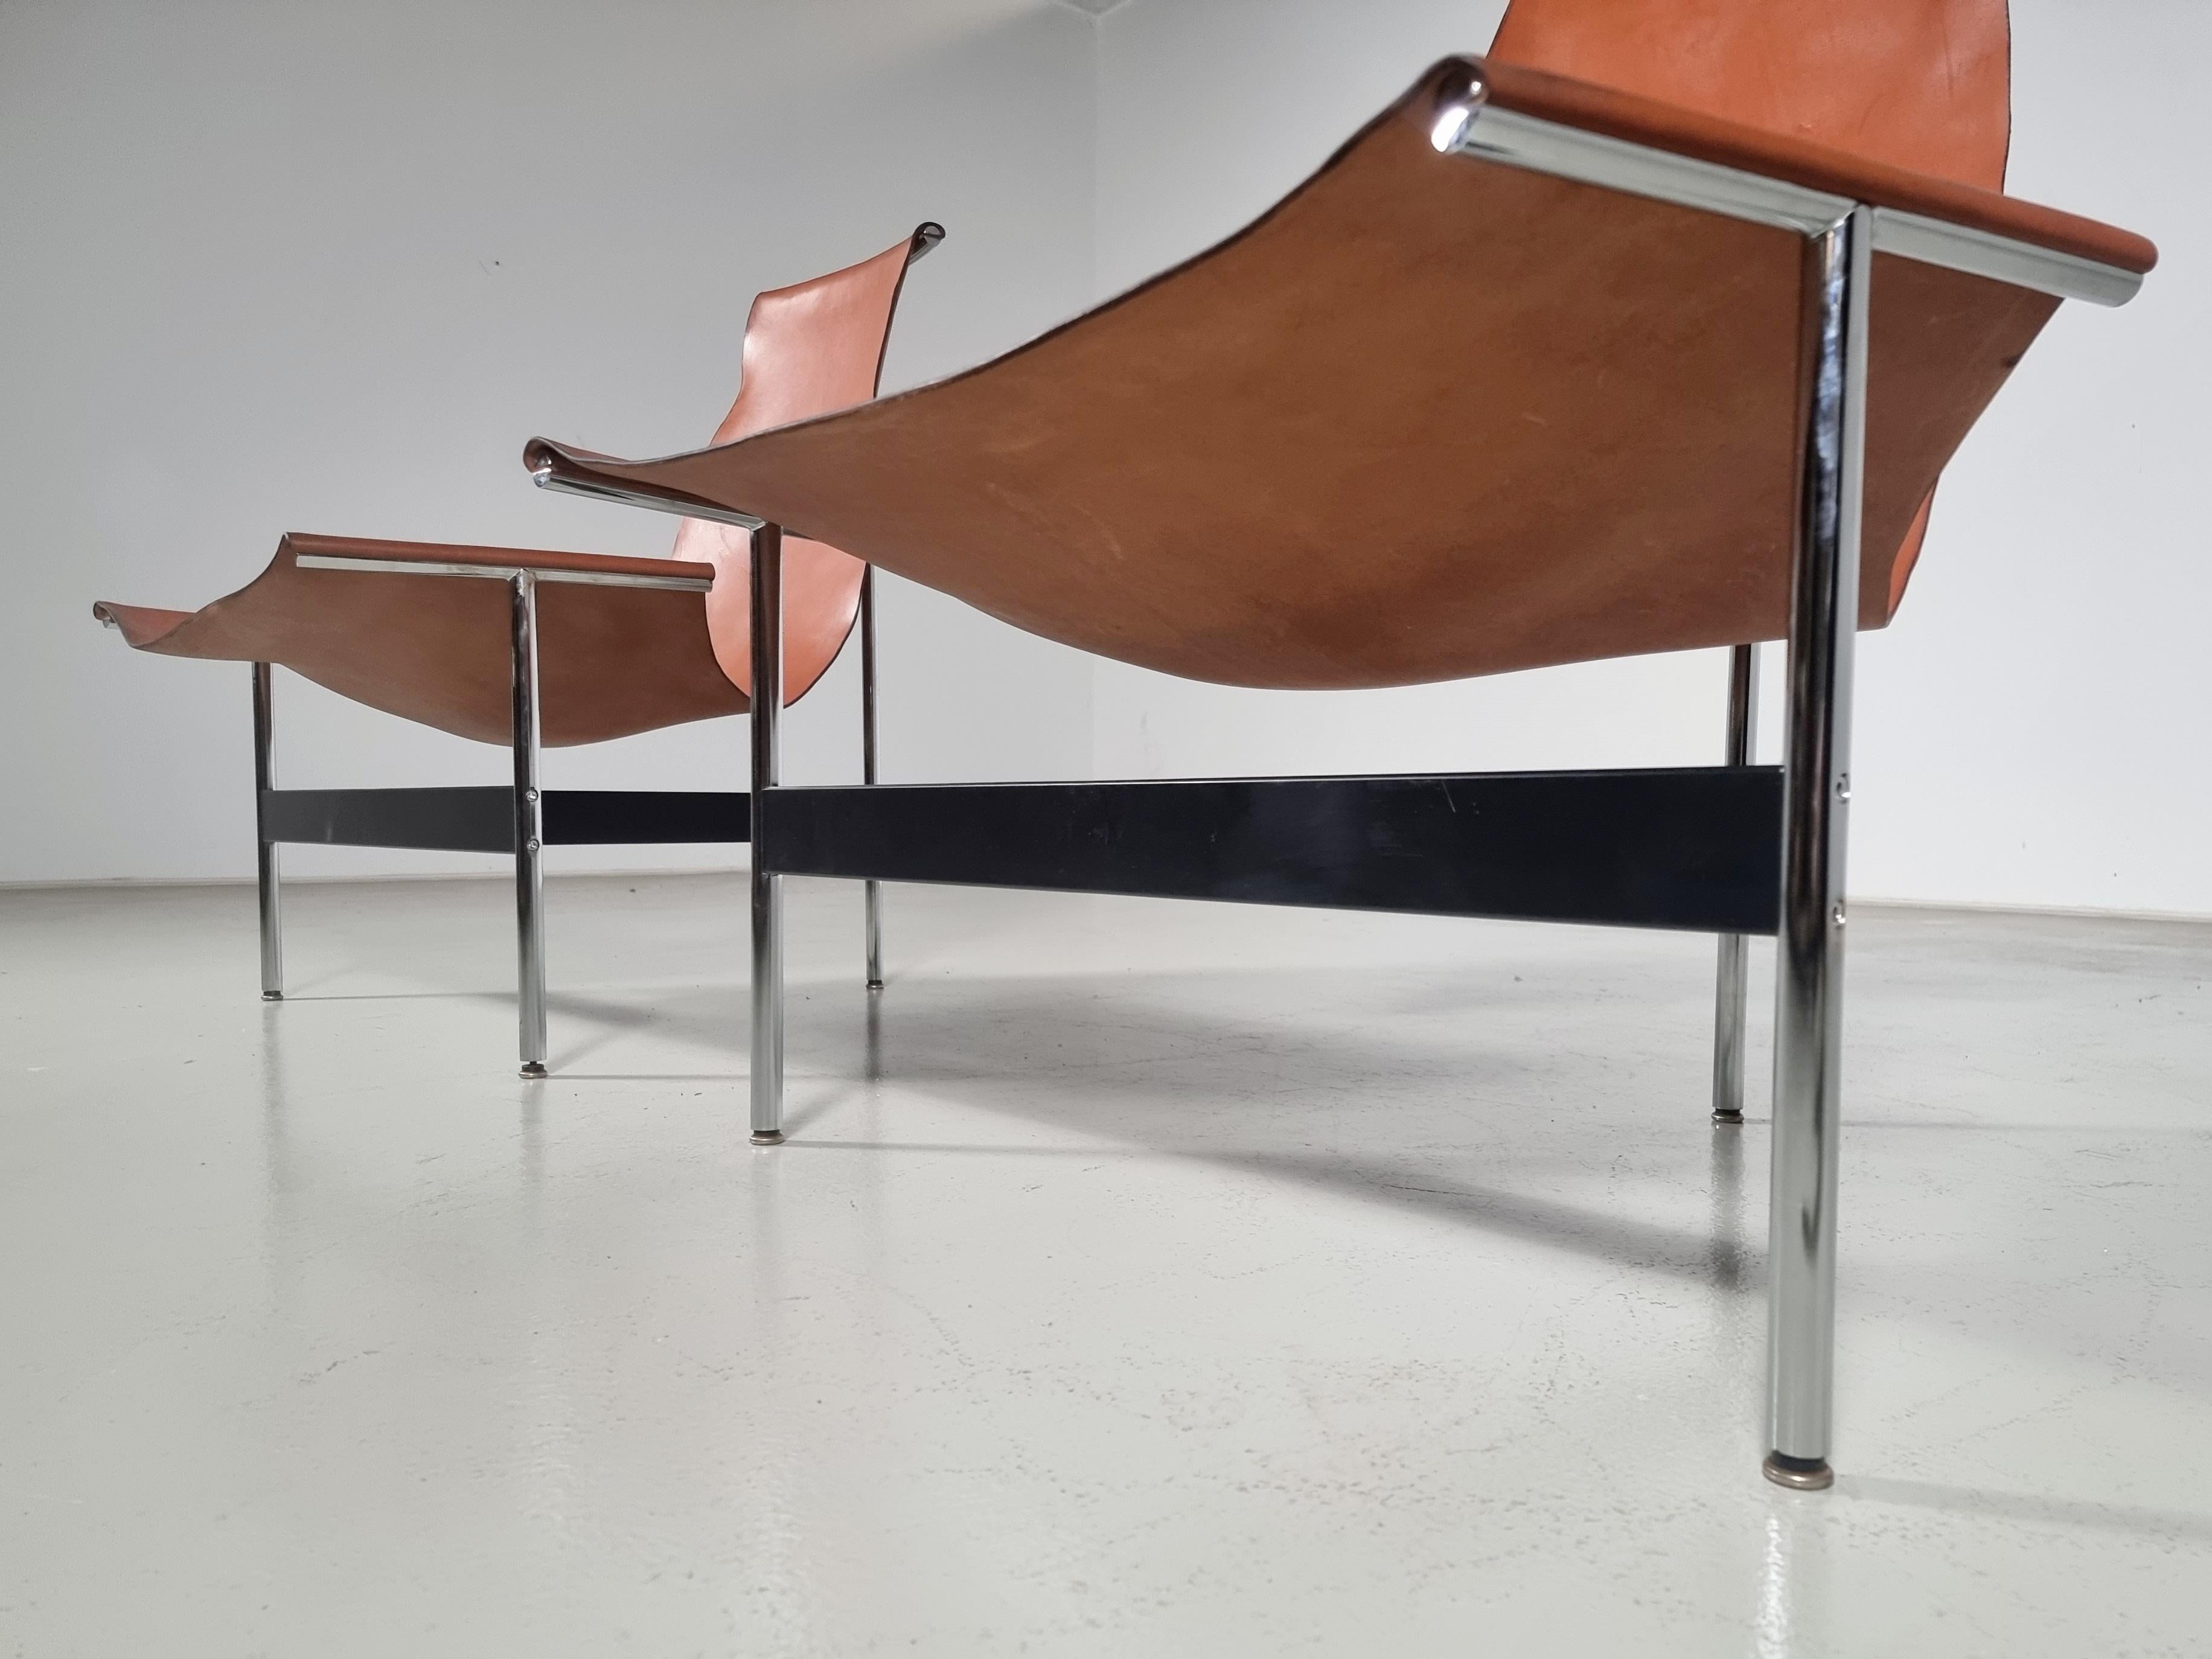 '3LC' T-Chairs by Katavolos, Littell and Kelley for Laverne International, 1950s For Sale 8